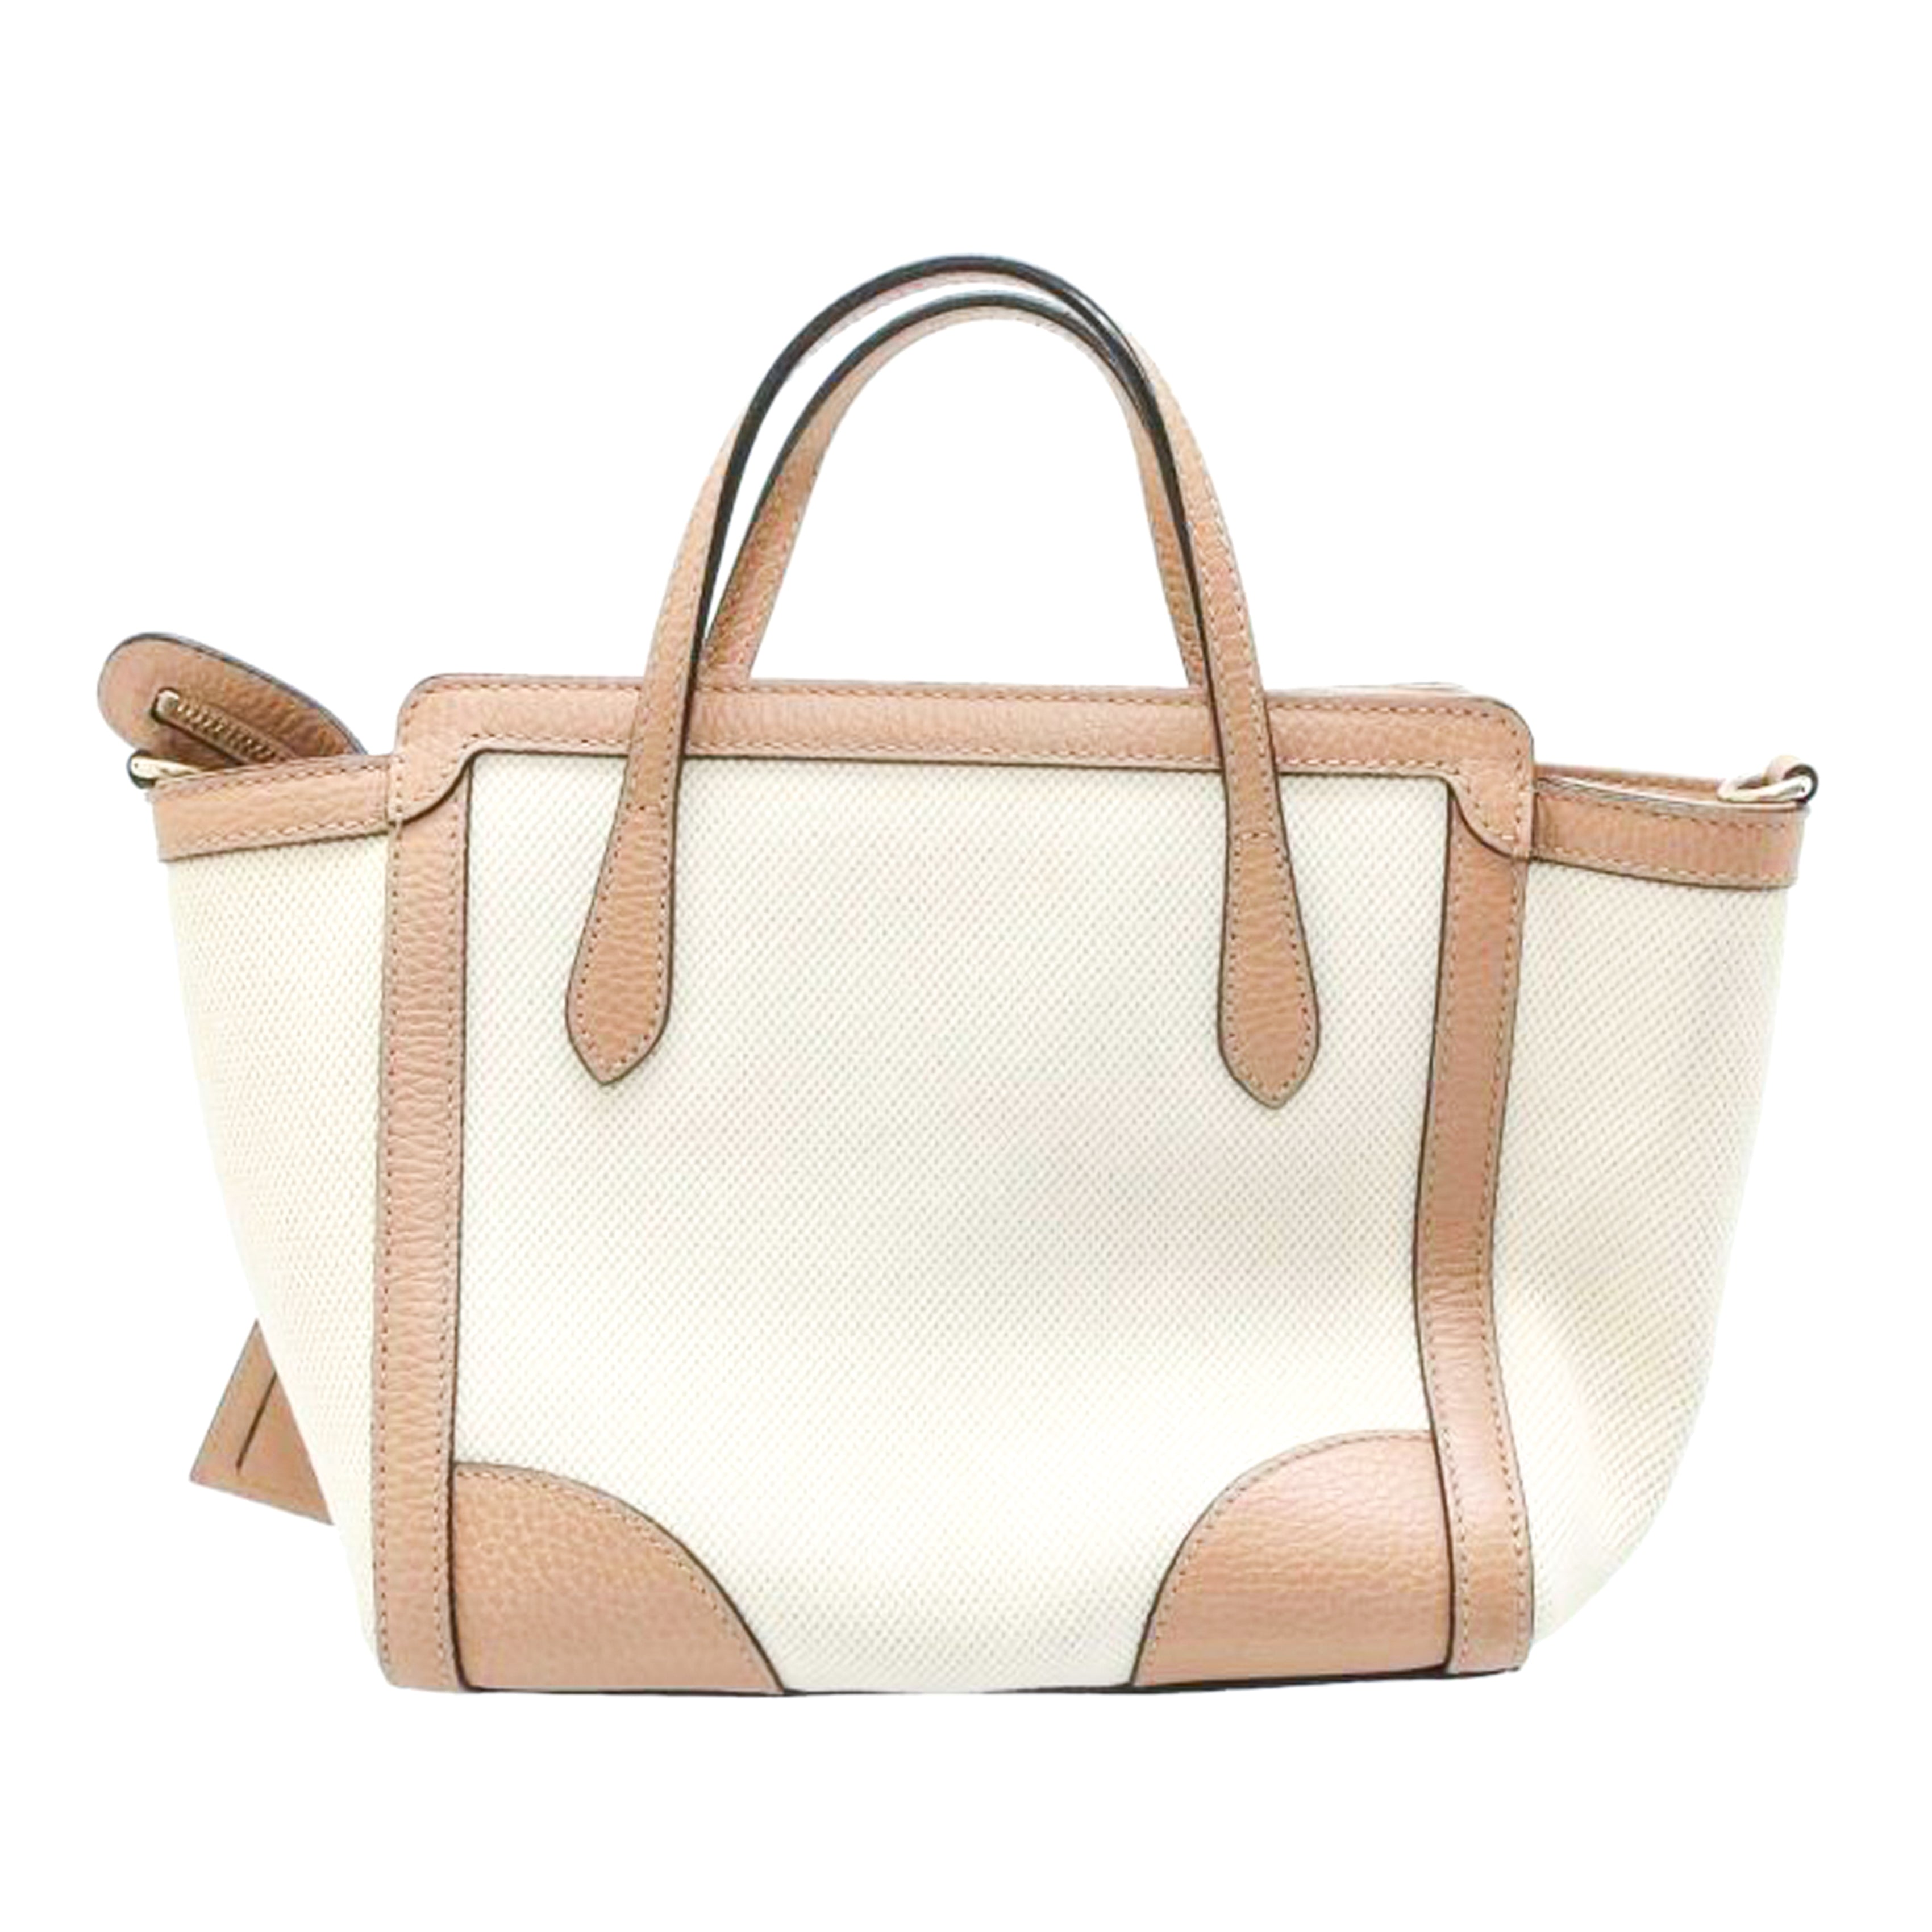 GUCCI Gucci Swing Tote Bag in Cream Canvas and Brown Leather - Vault 55